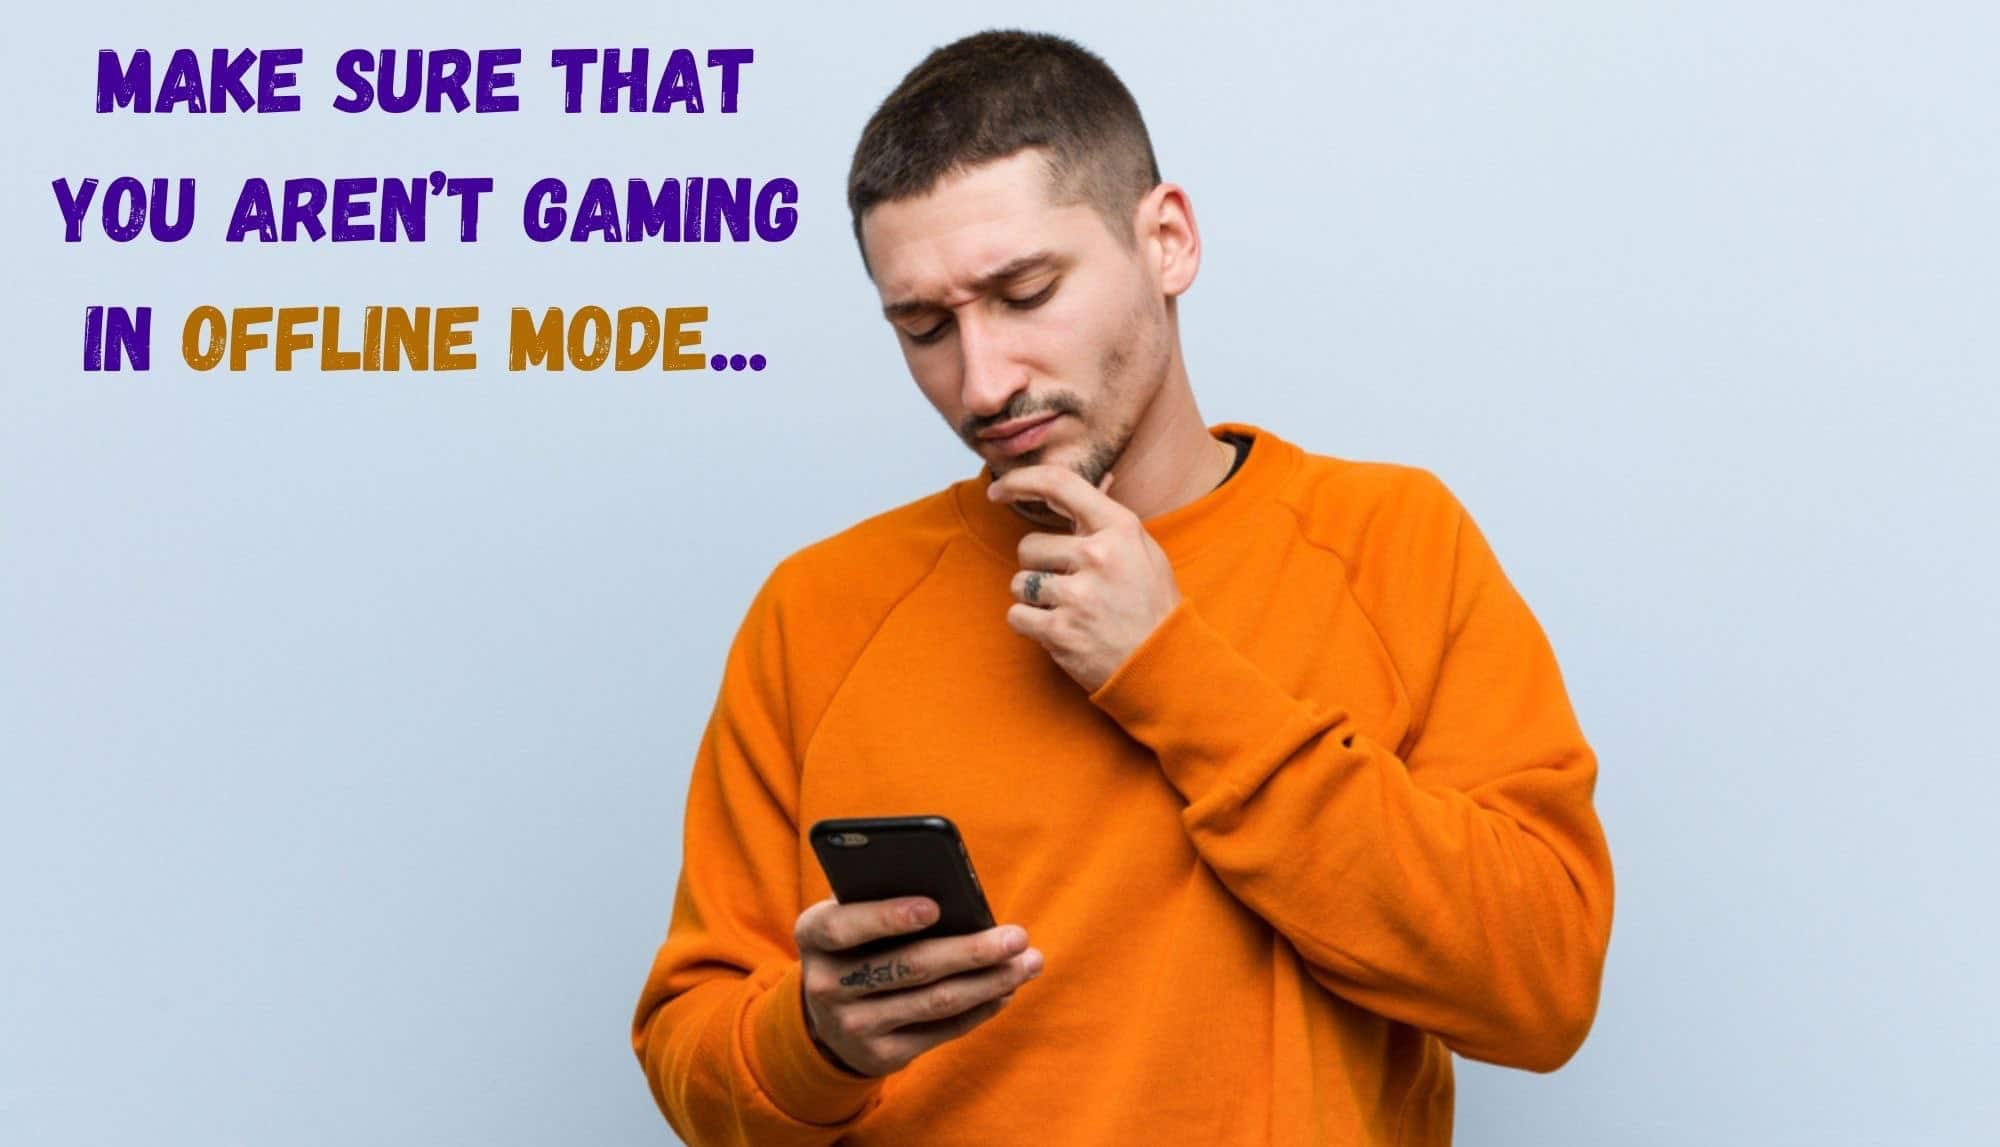 Make sure that you aren’t gaming in offline mode 